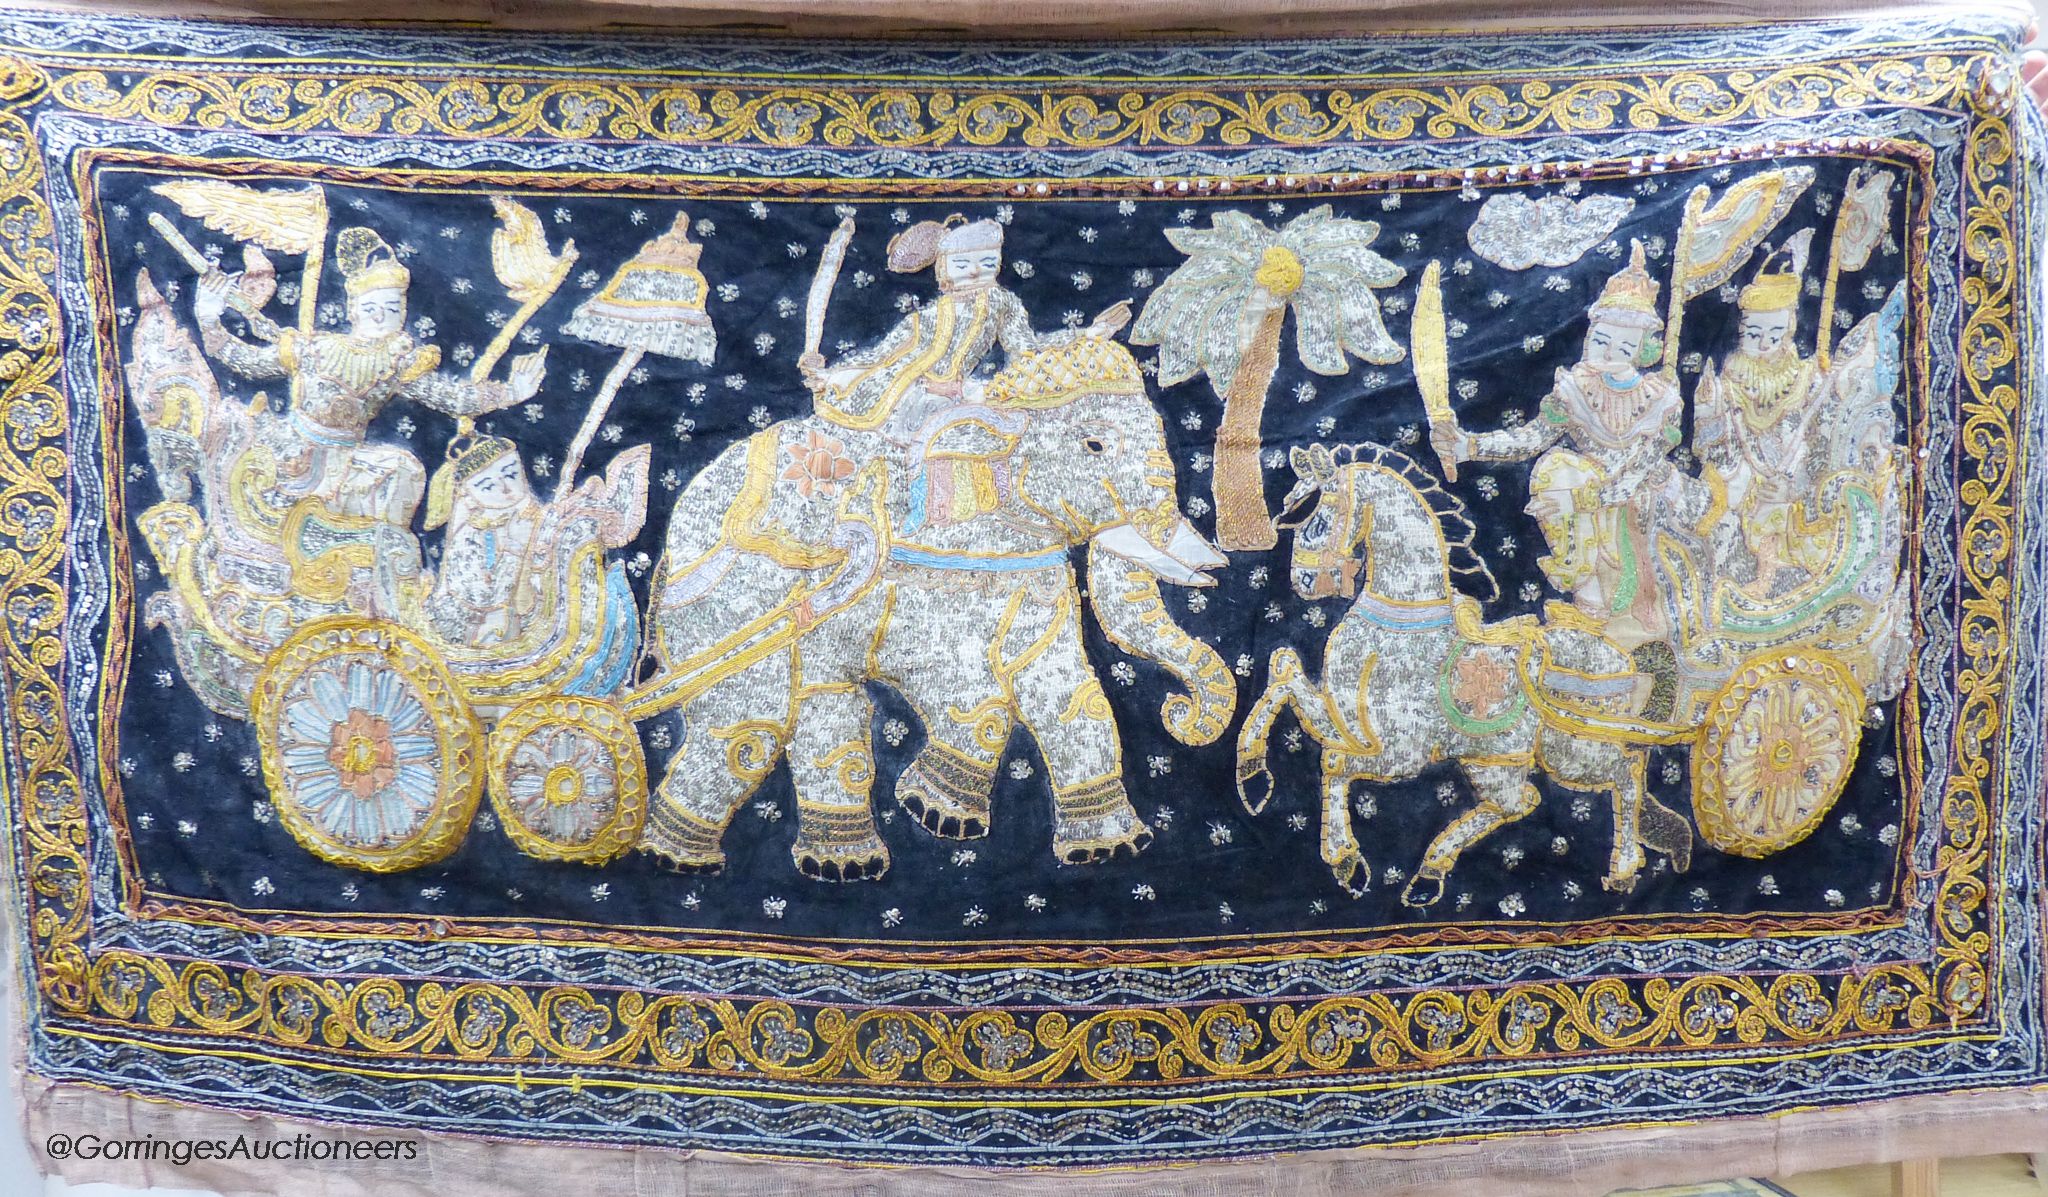 A large 20th century Indian embroidered panel